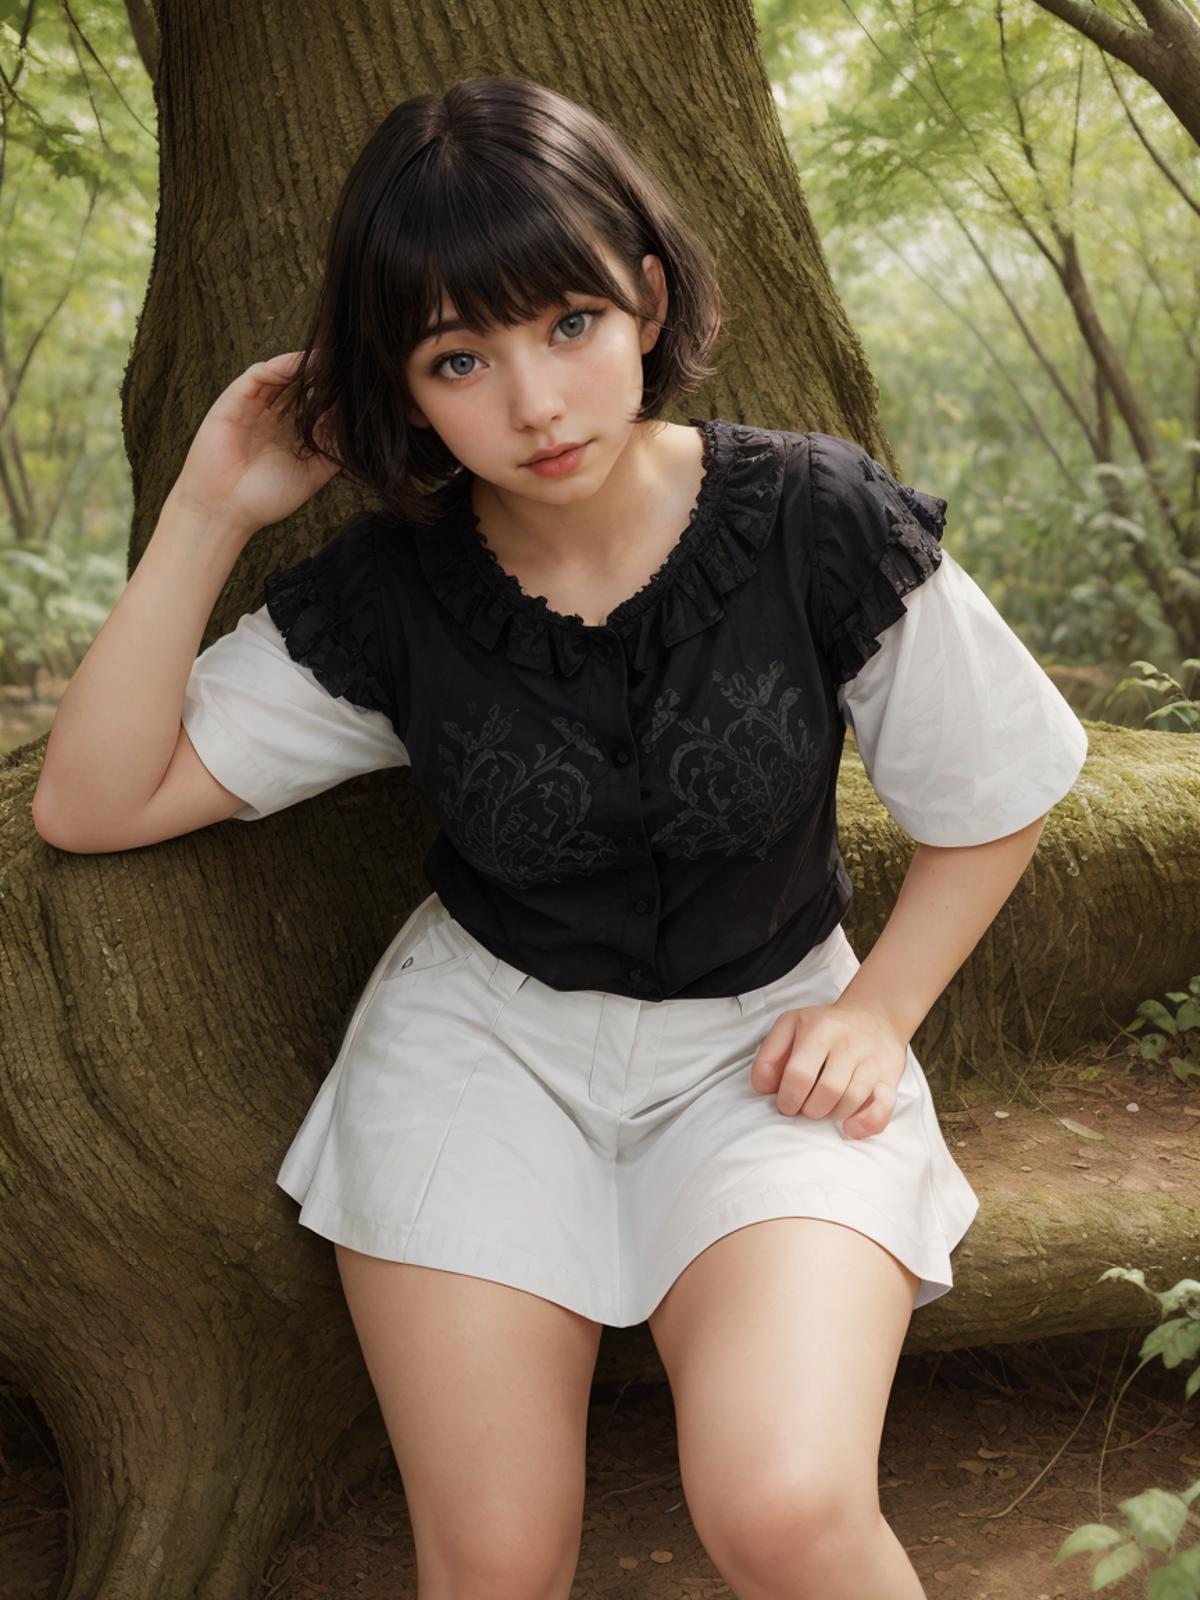 A woman in a black and white shirt sitting on a tree trunk.